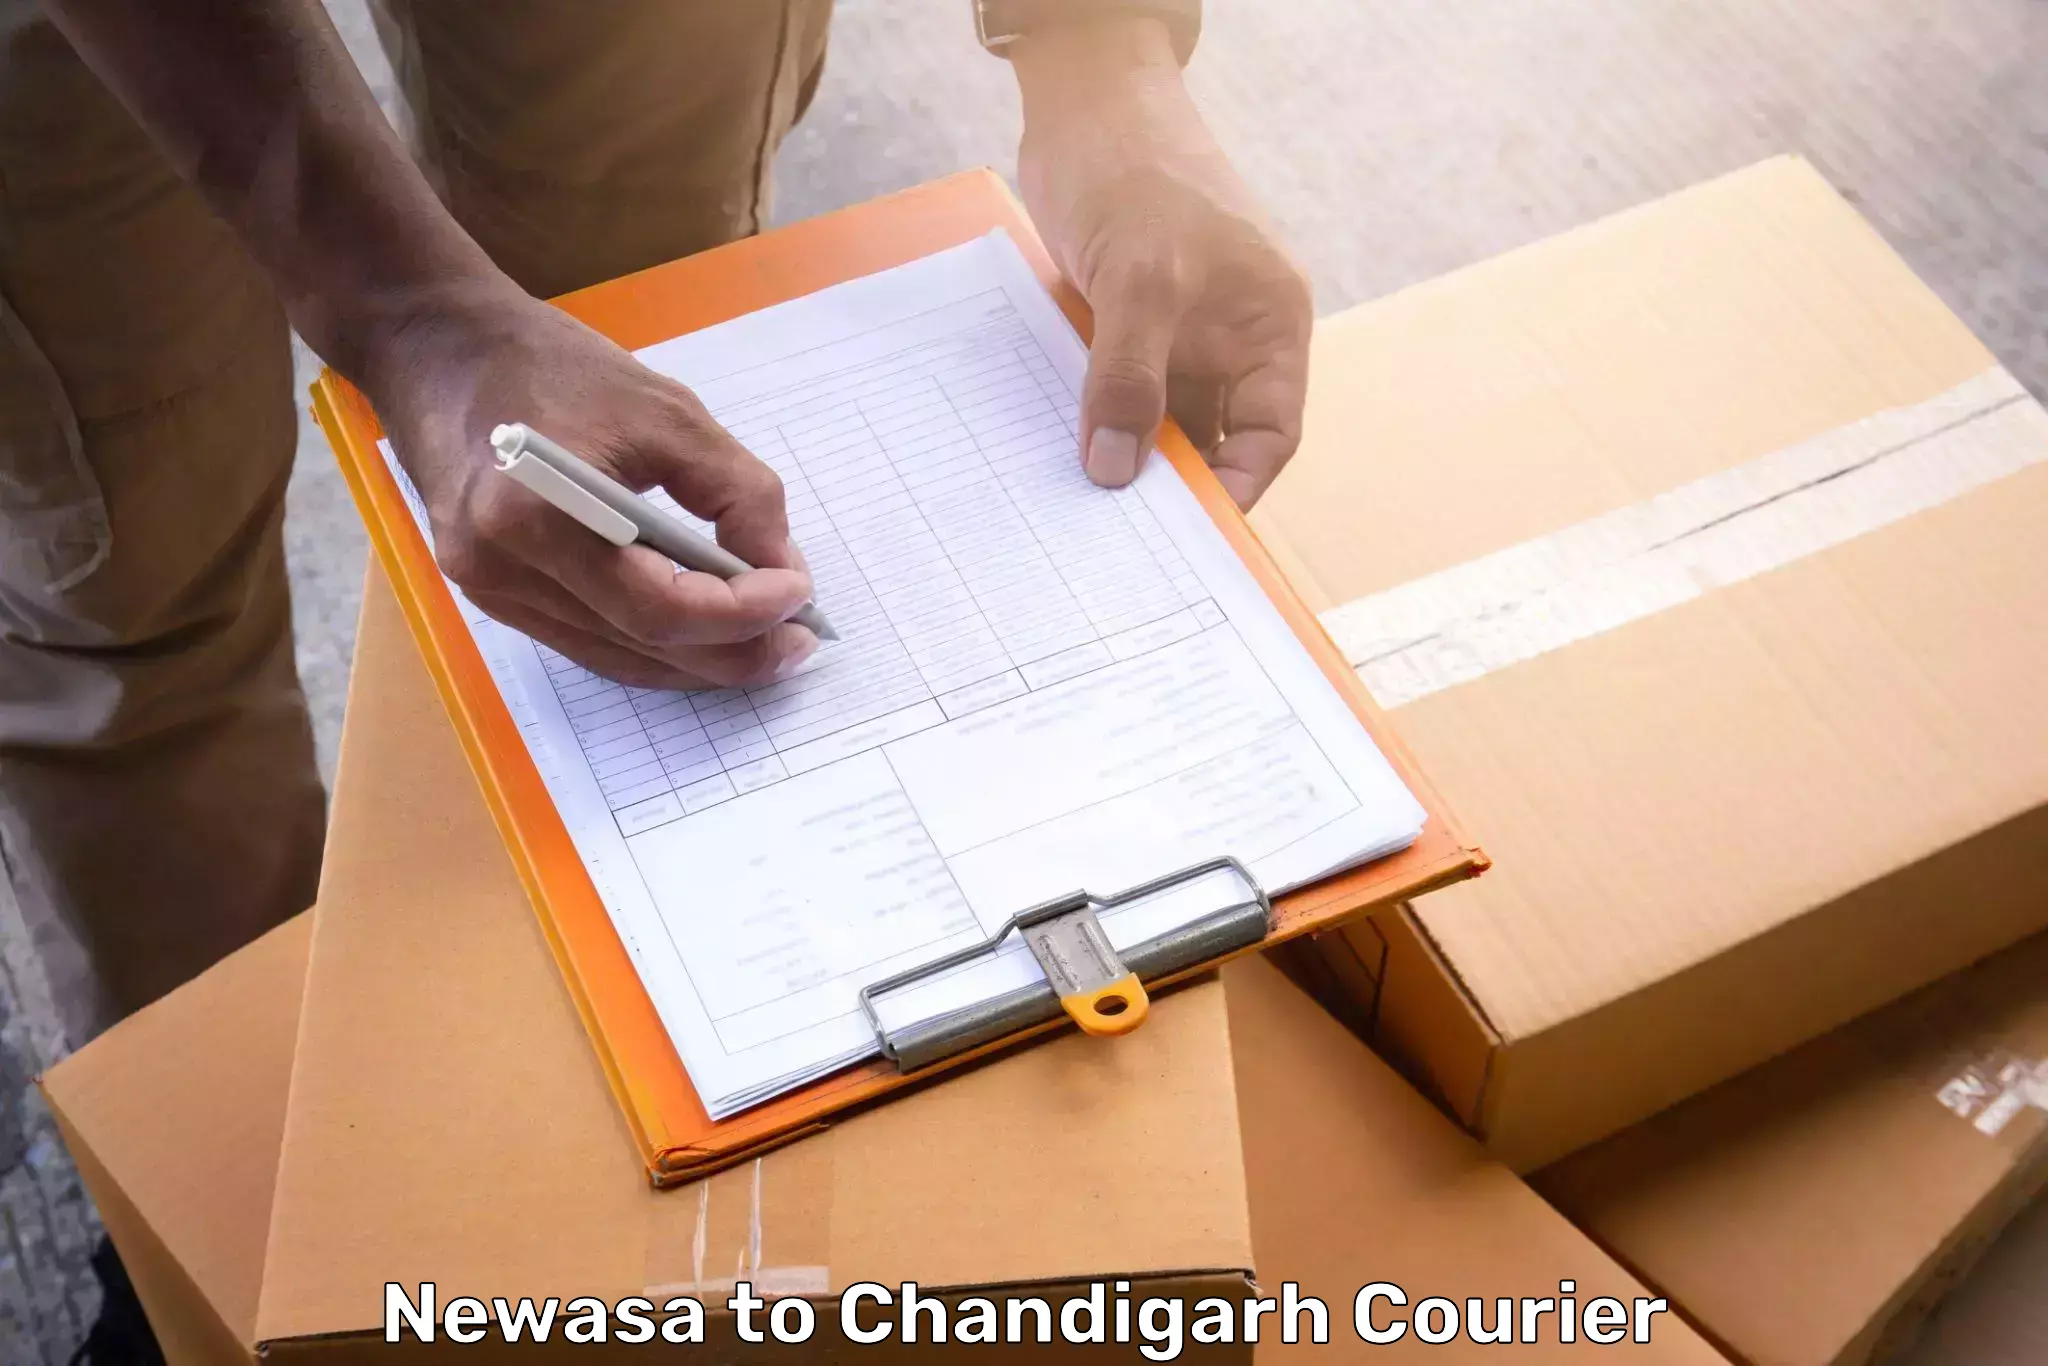 Luggage delivery app Newasa to Chandigarh